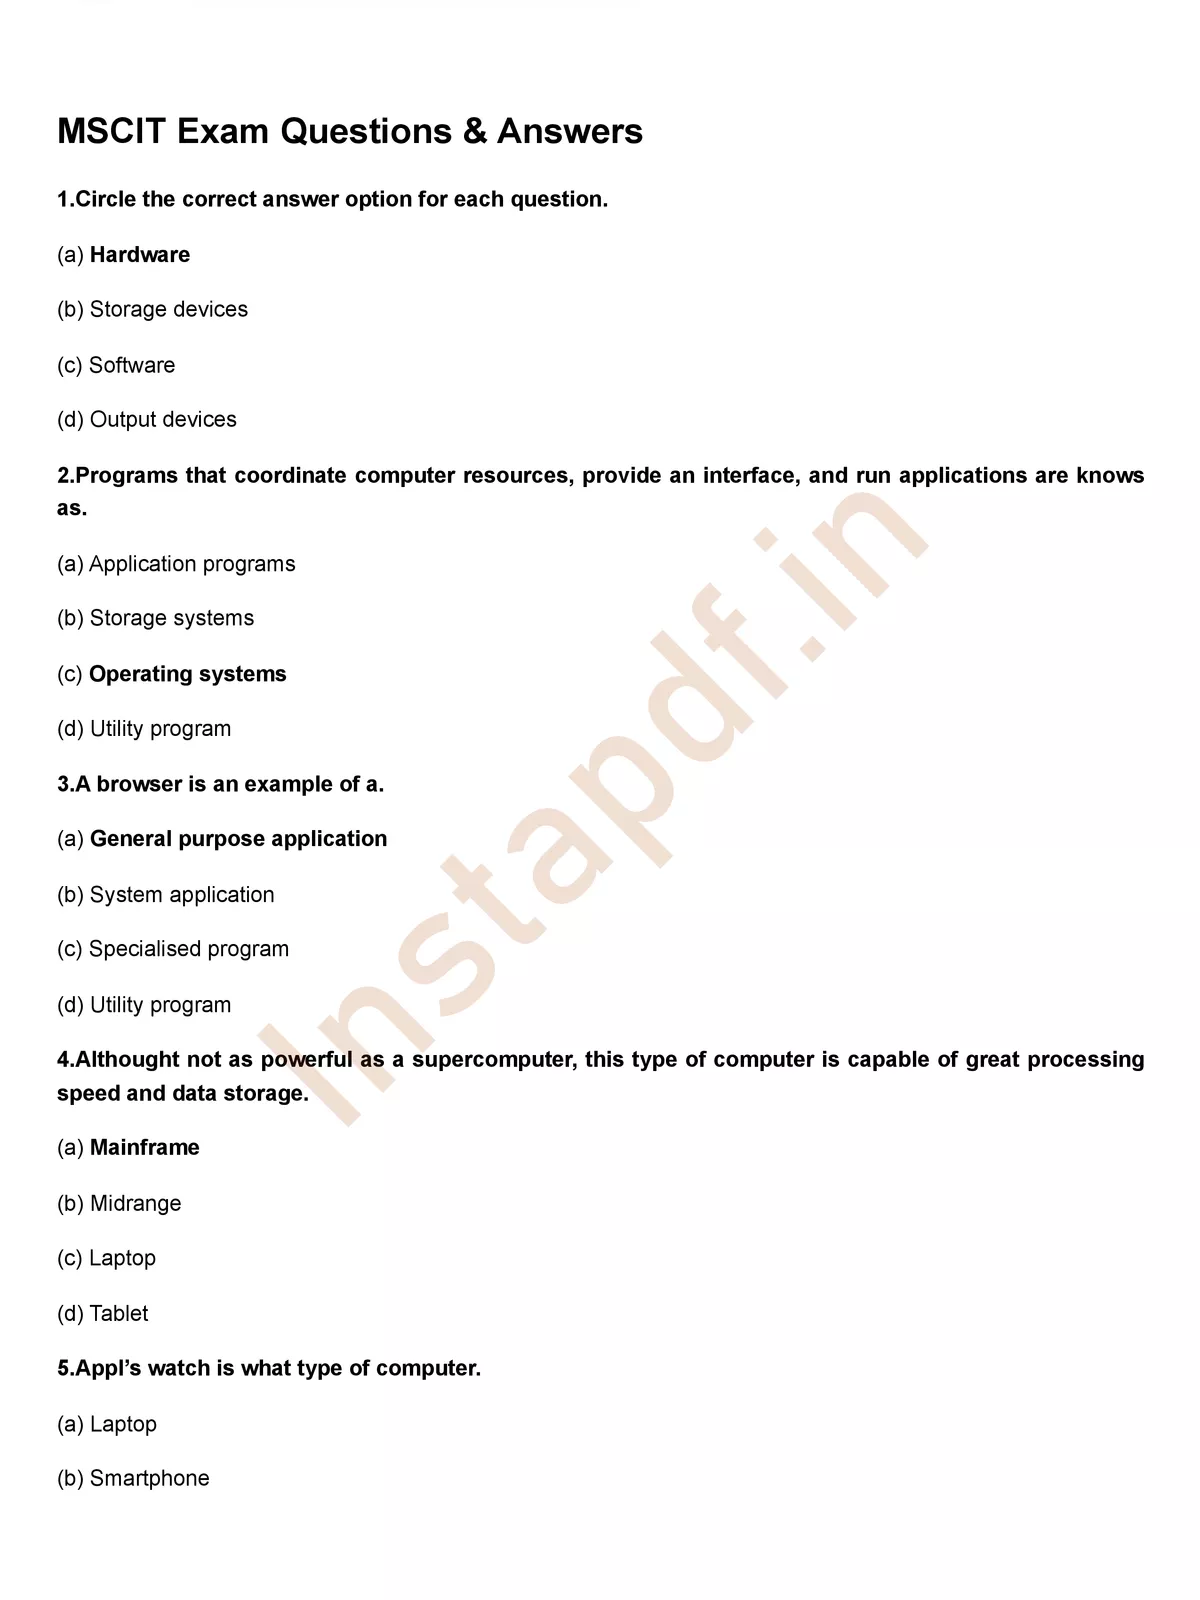 MSCIT  Exam Questions Answers